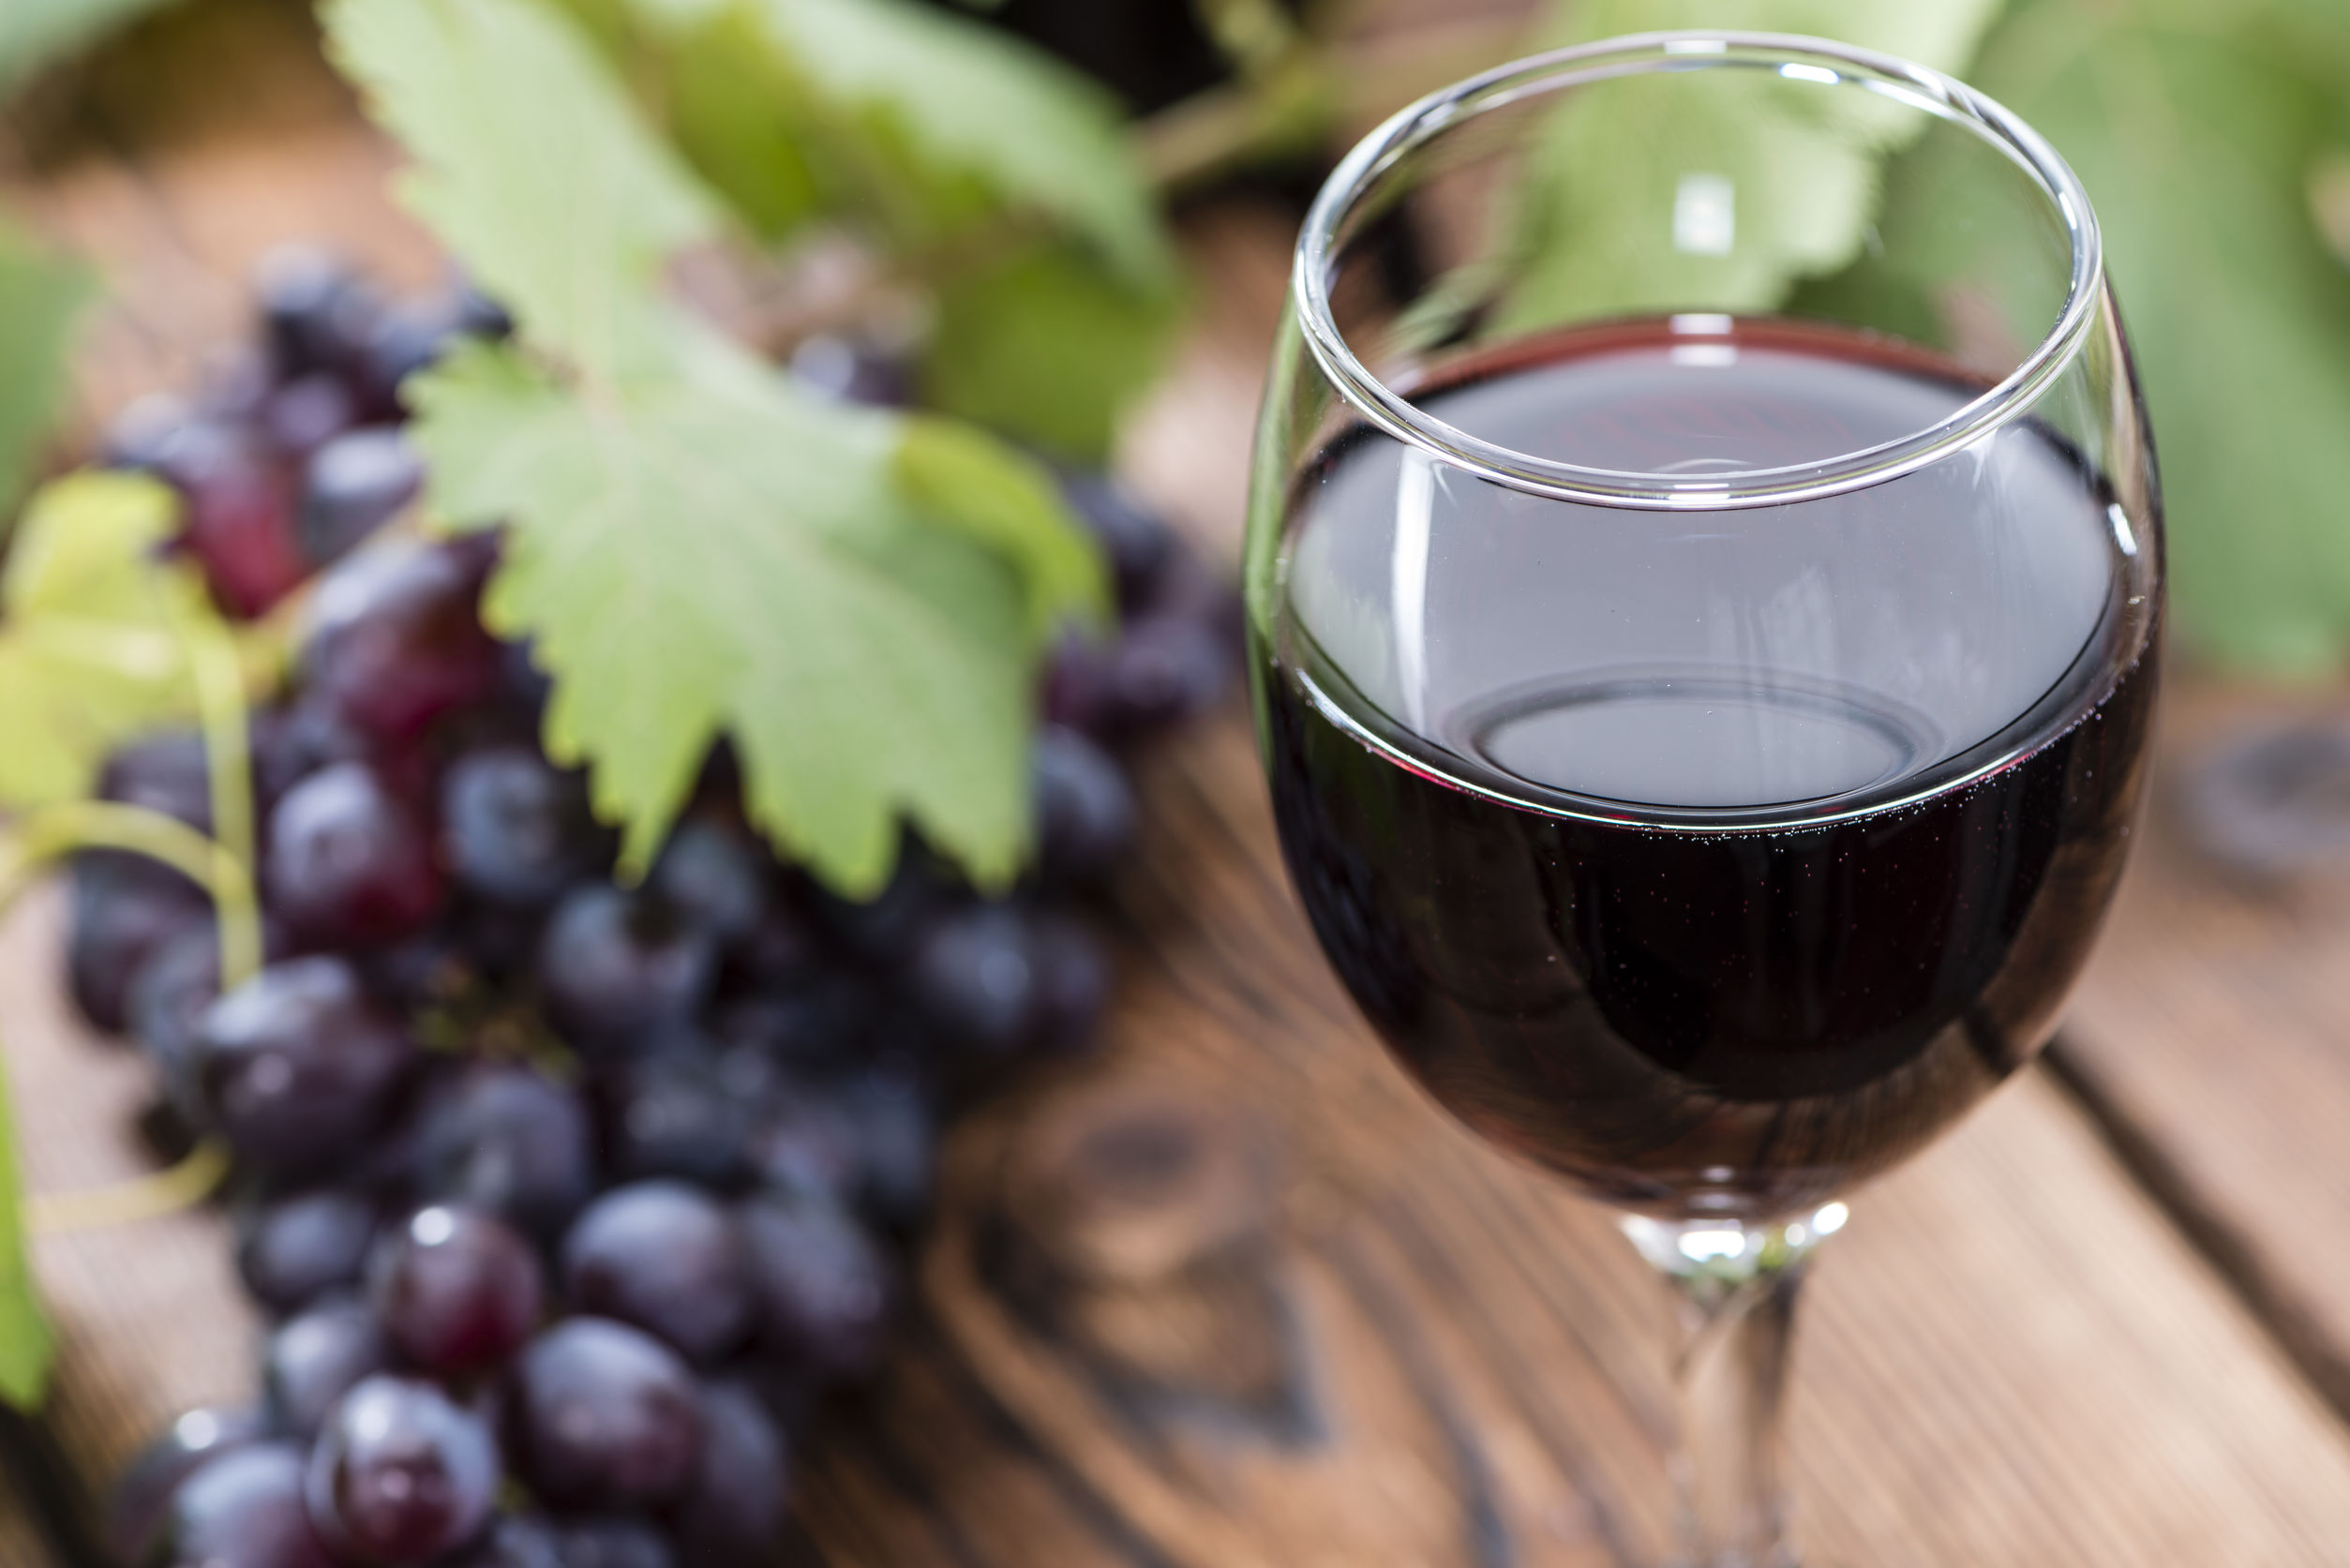 31331507 - glass with red wine and fresh grapes on wooden background